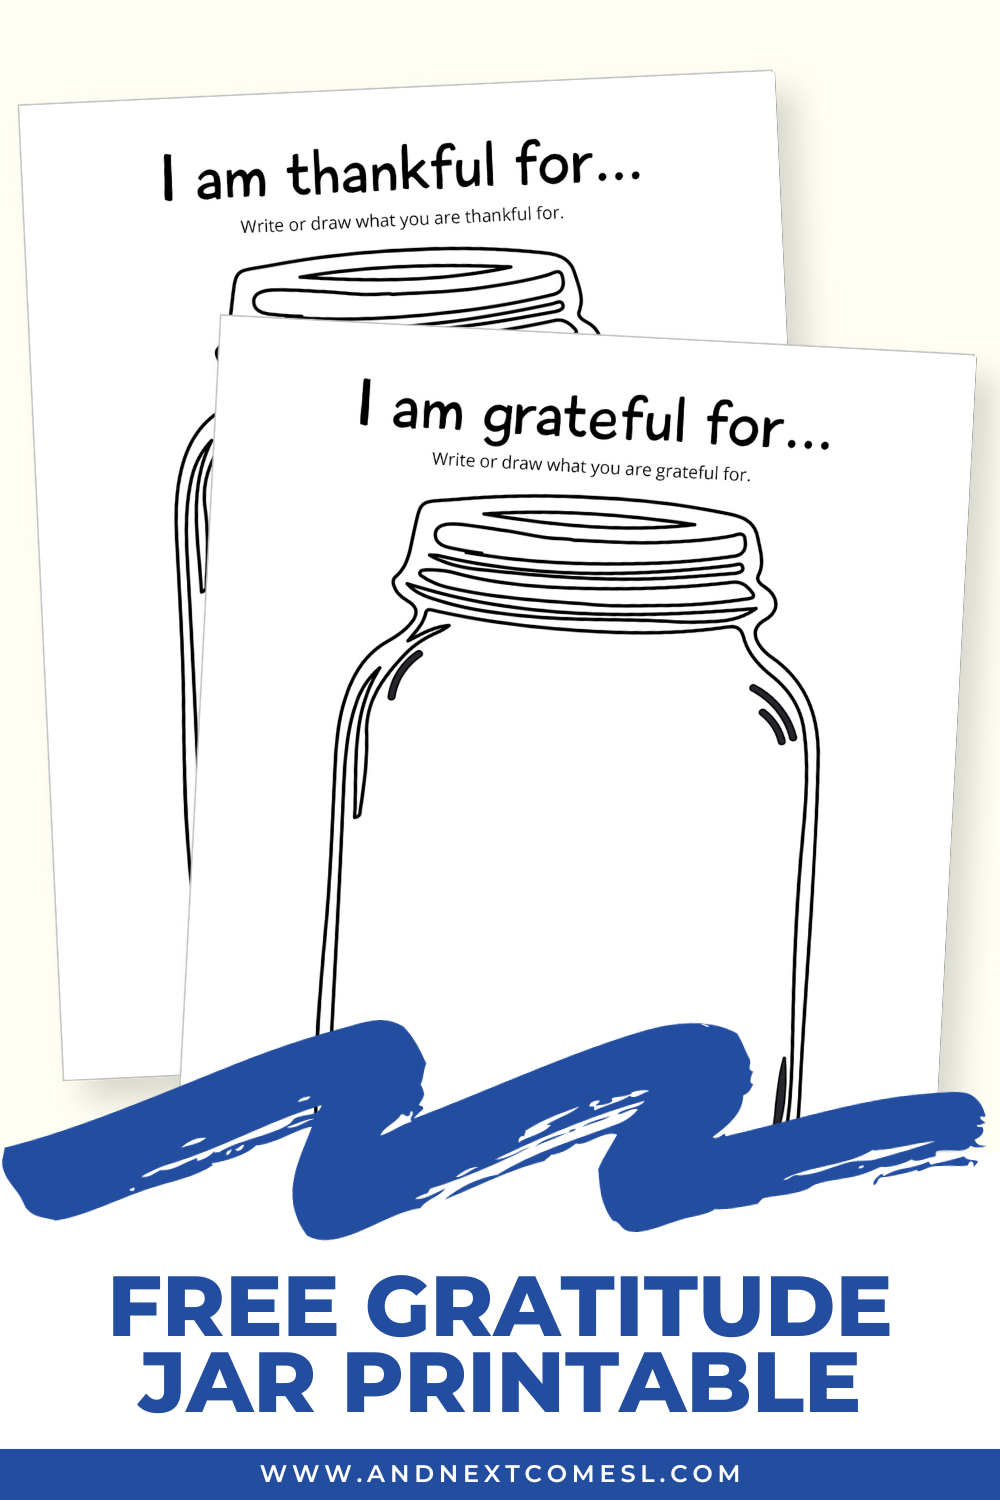 Free gratitude jar printable for practicing mindfulness - great for kids and teens!